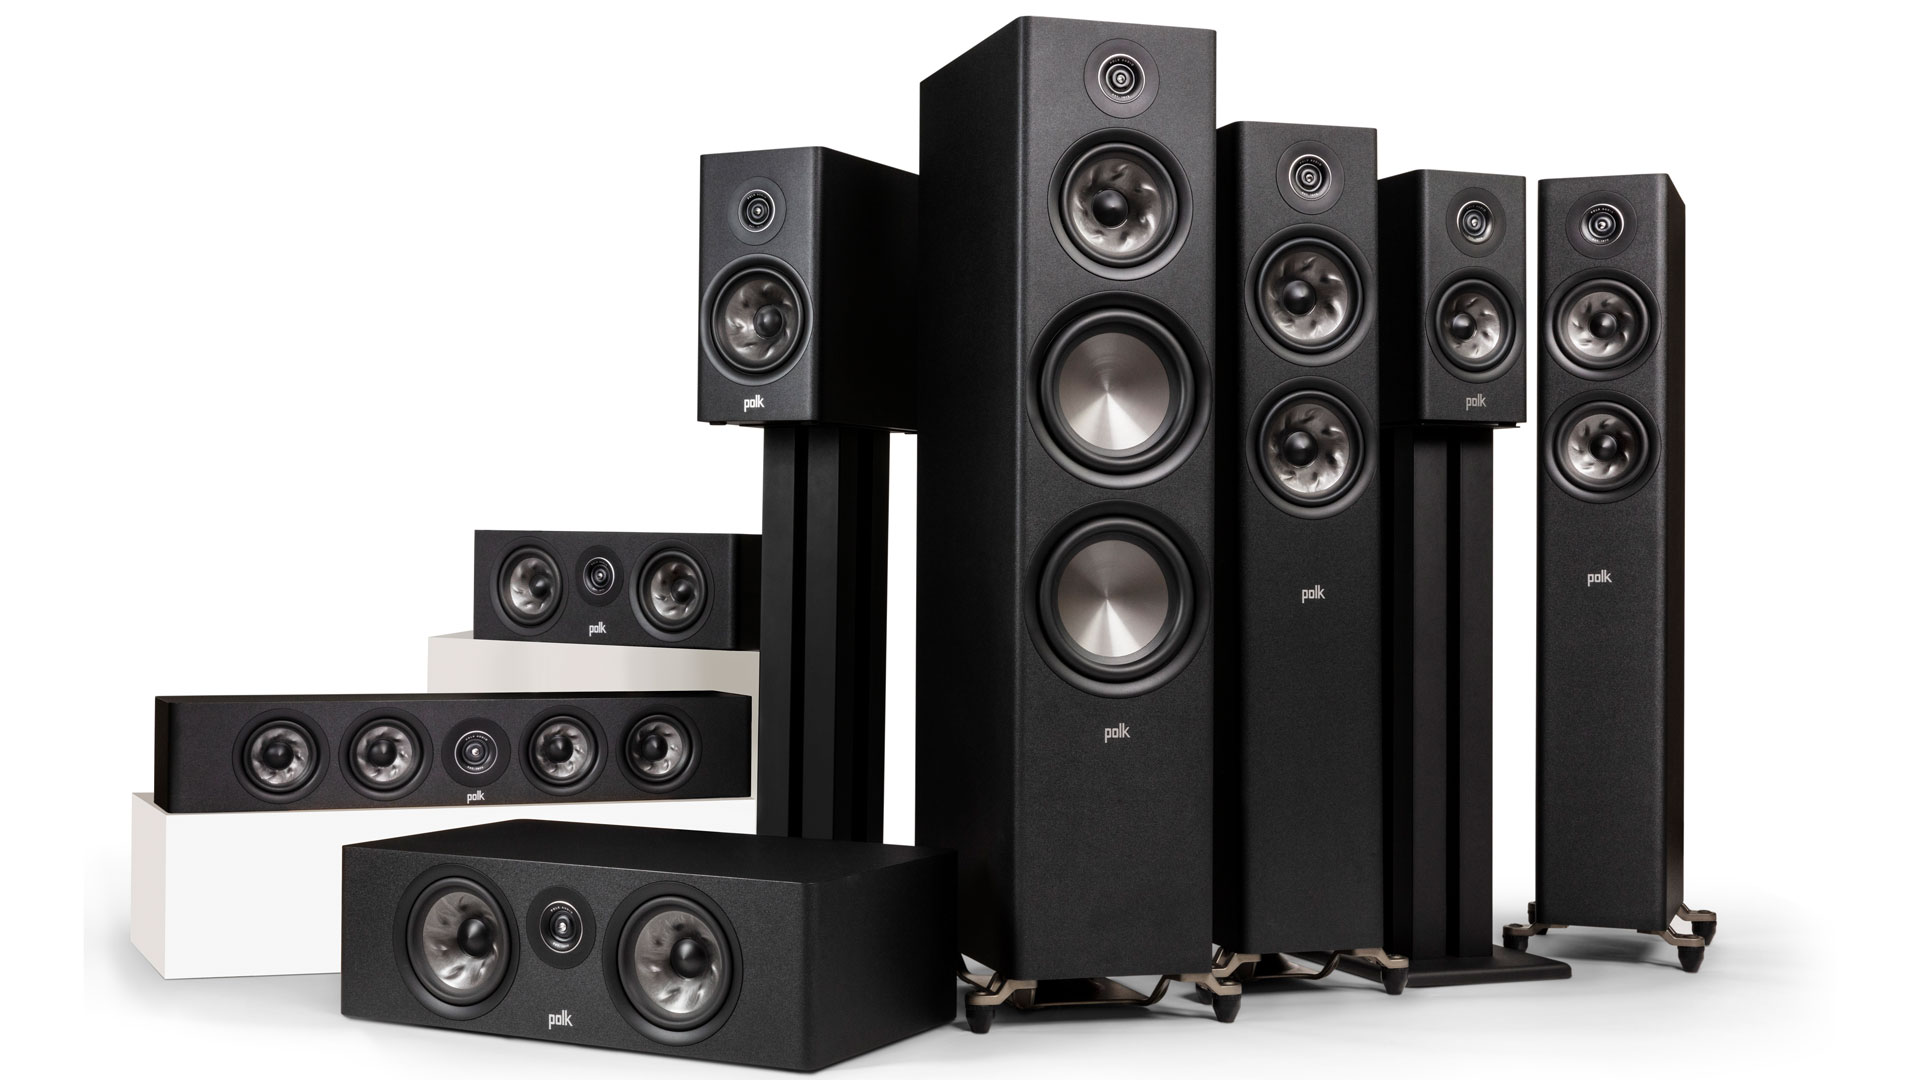 The New Reserve Series from Polk Audio (Image Credit: Polk Audio)